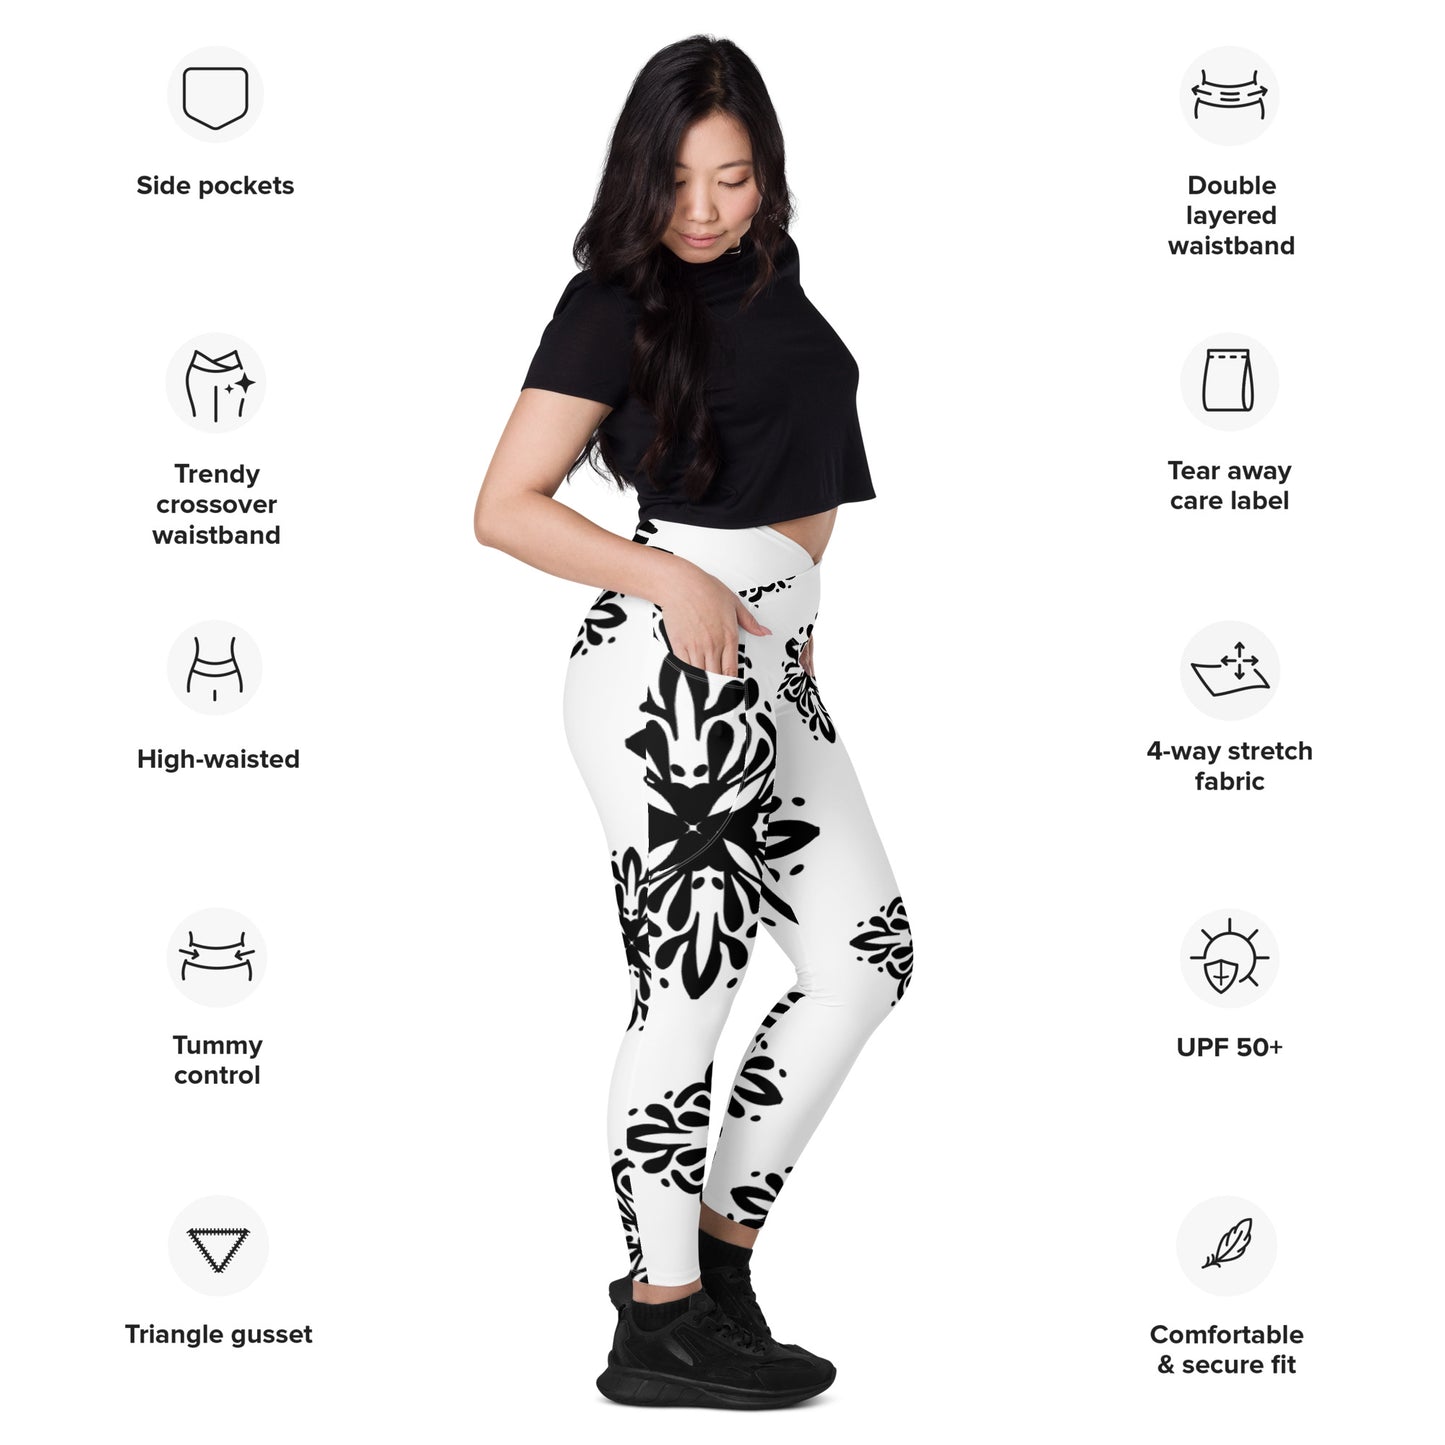 Cute black and white Crossover leggings with pockets